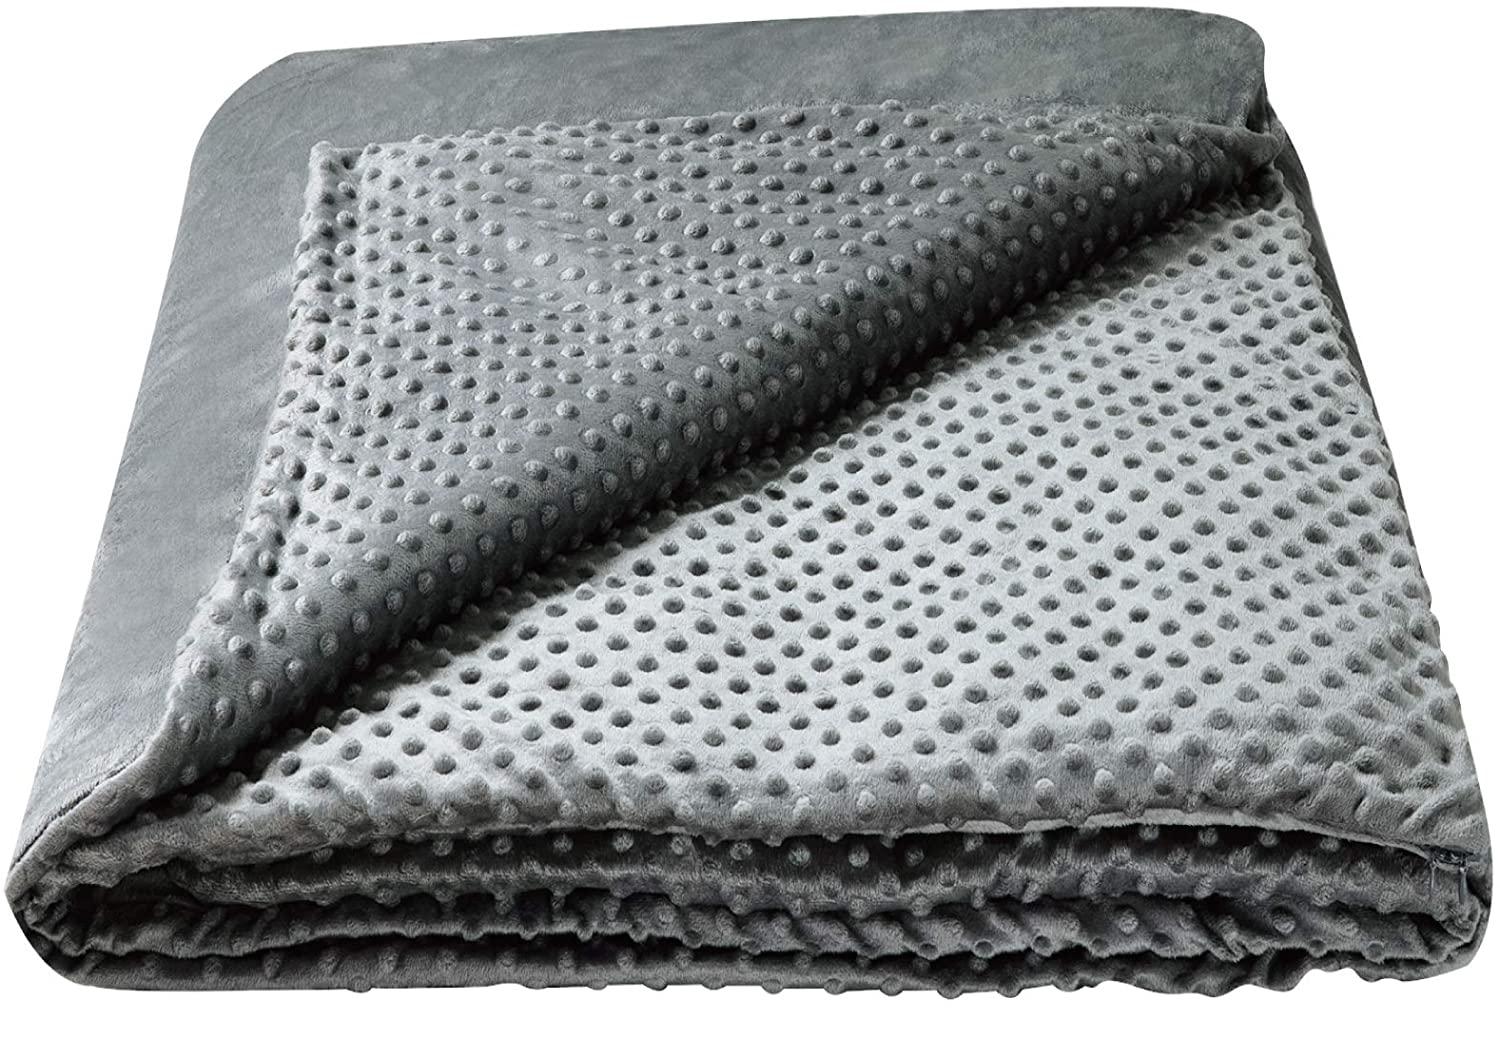 Bedsure Weighted Blanket Duvet Cover for $11.99 Shipped